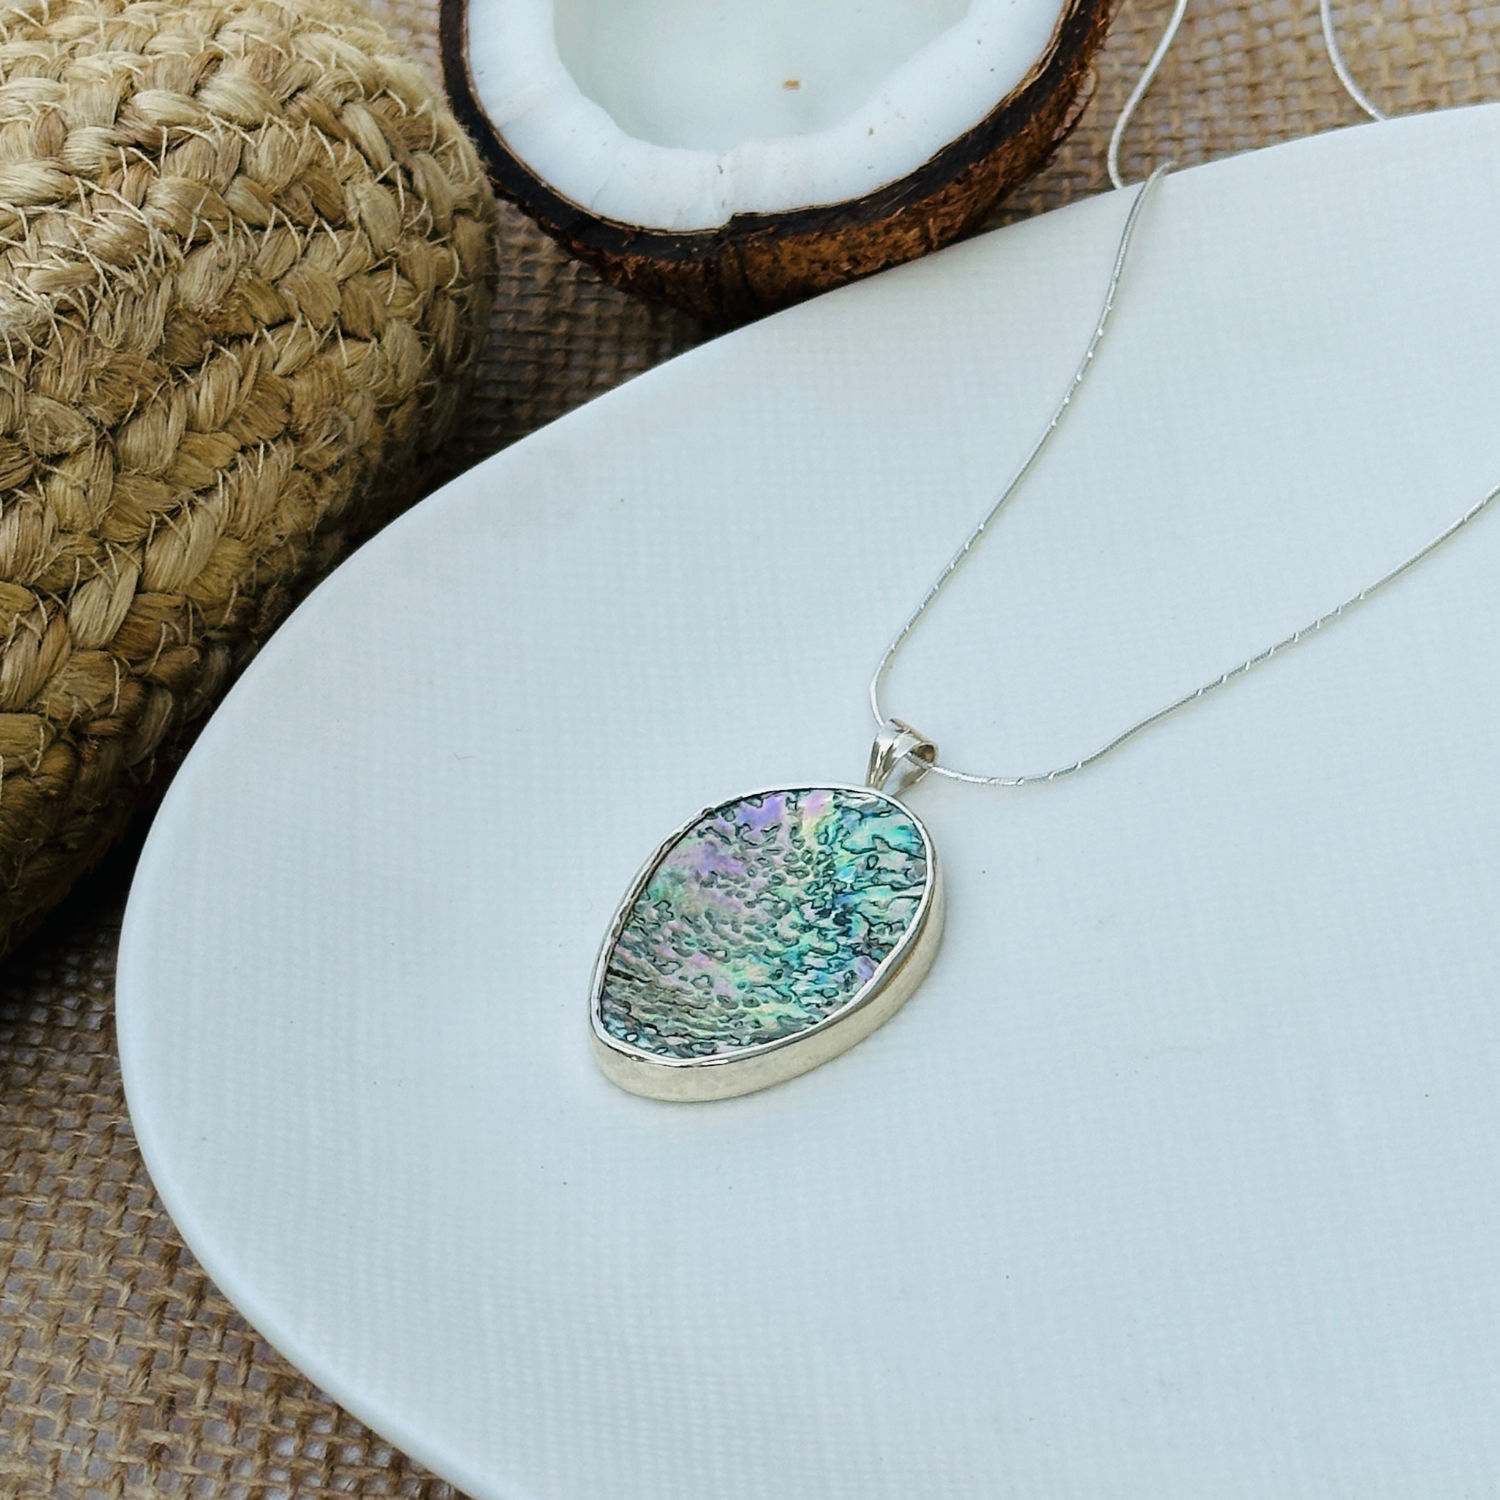 Mary Abalone Silver 925 Pendant